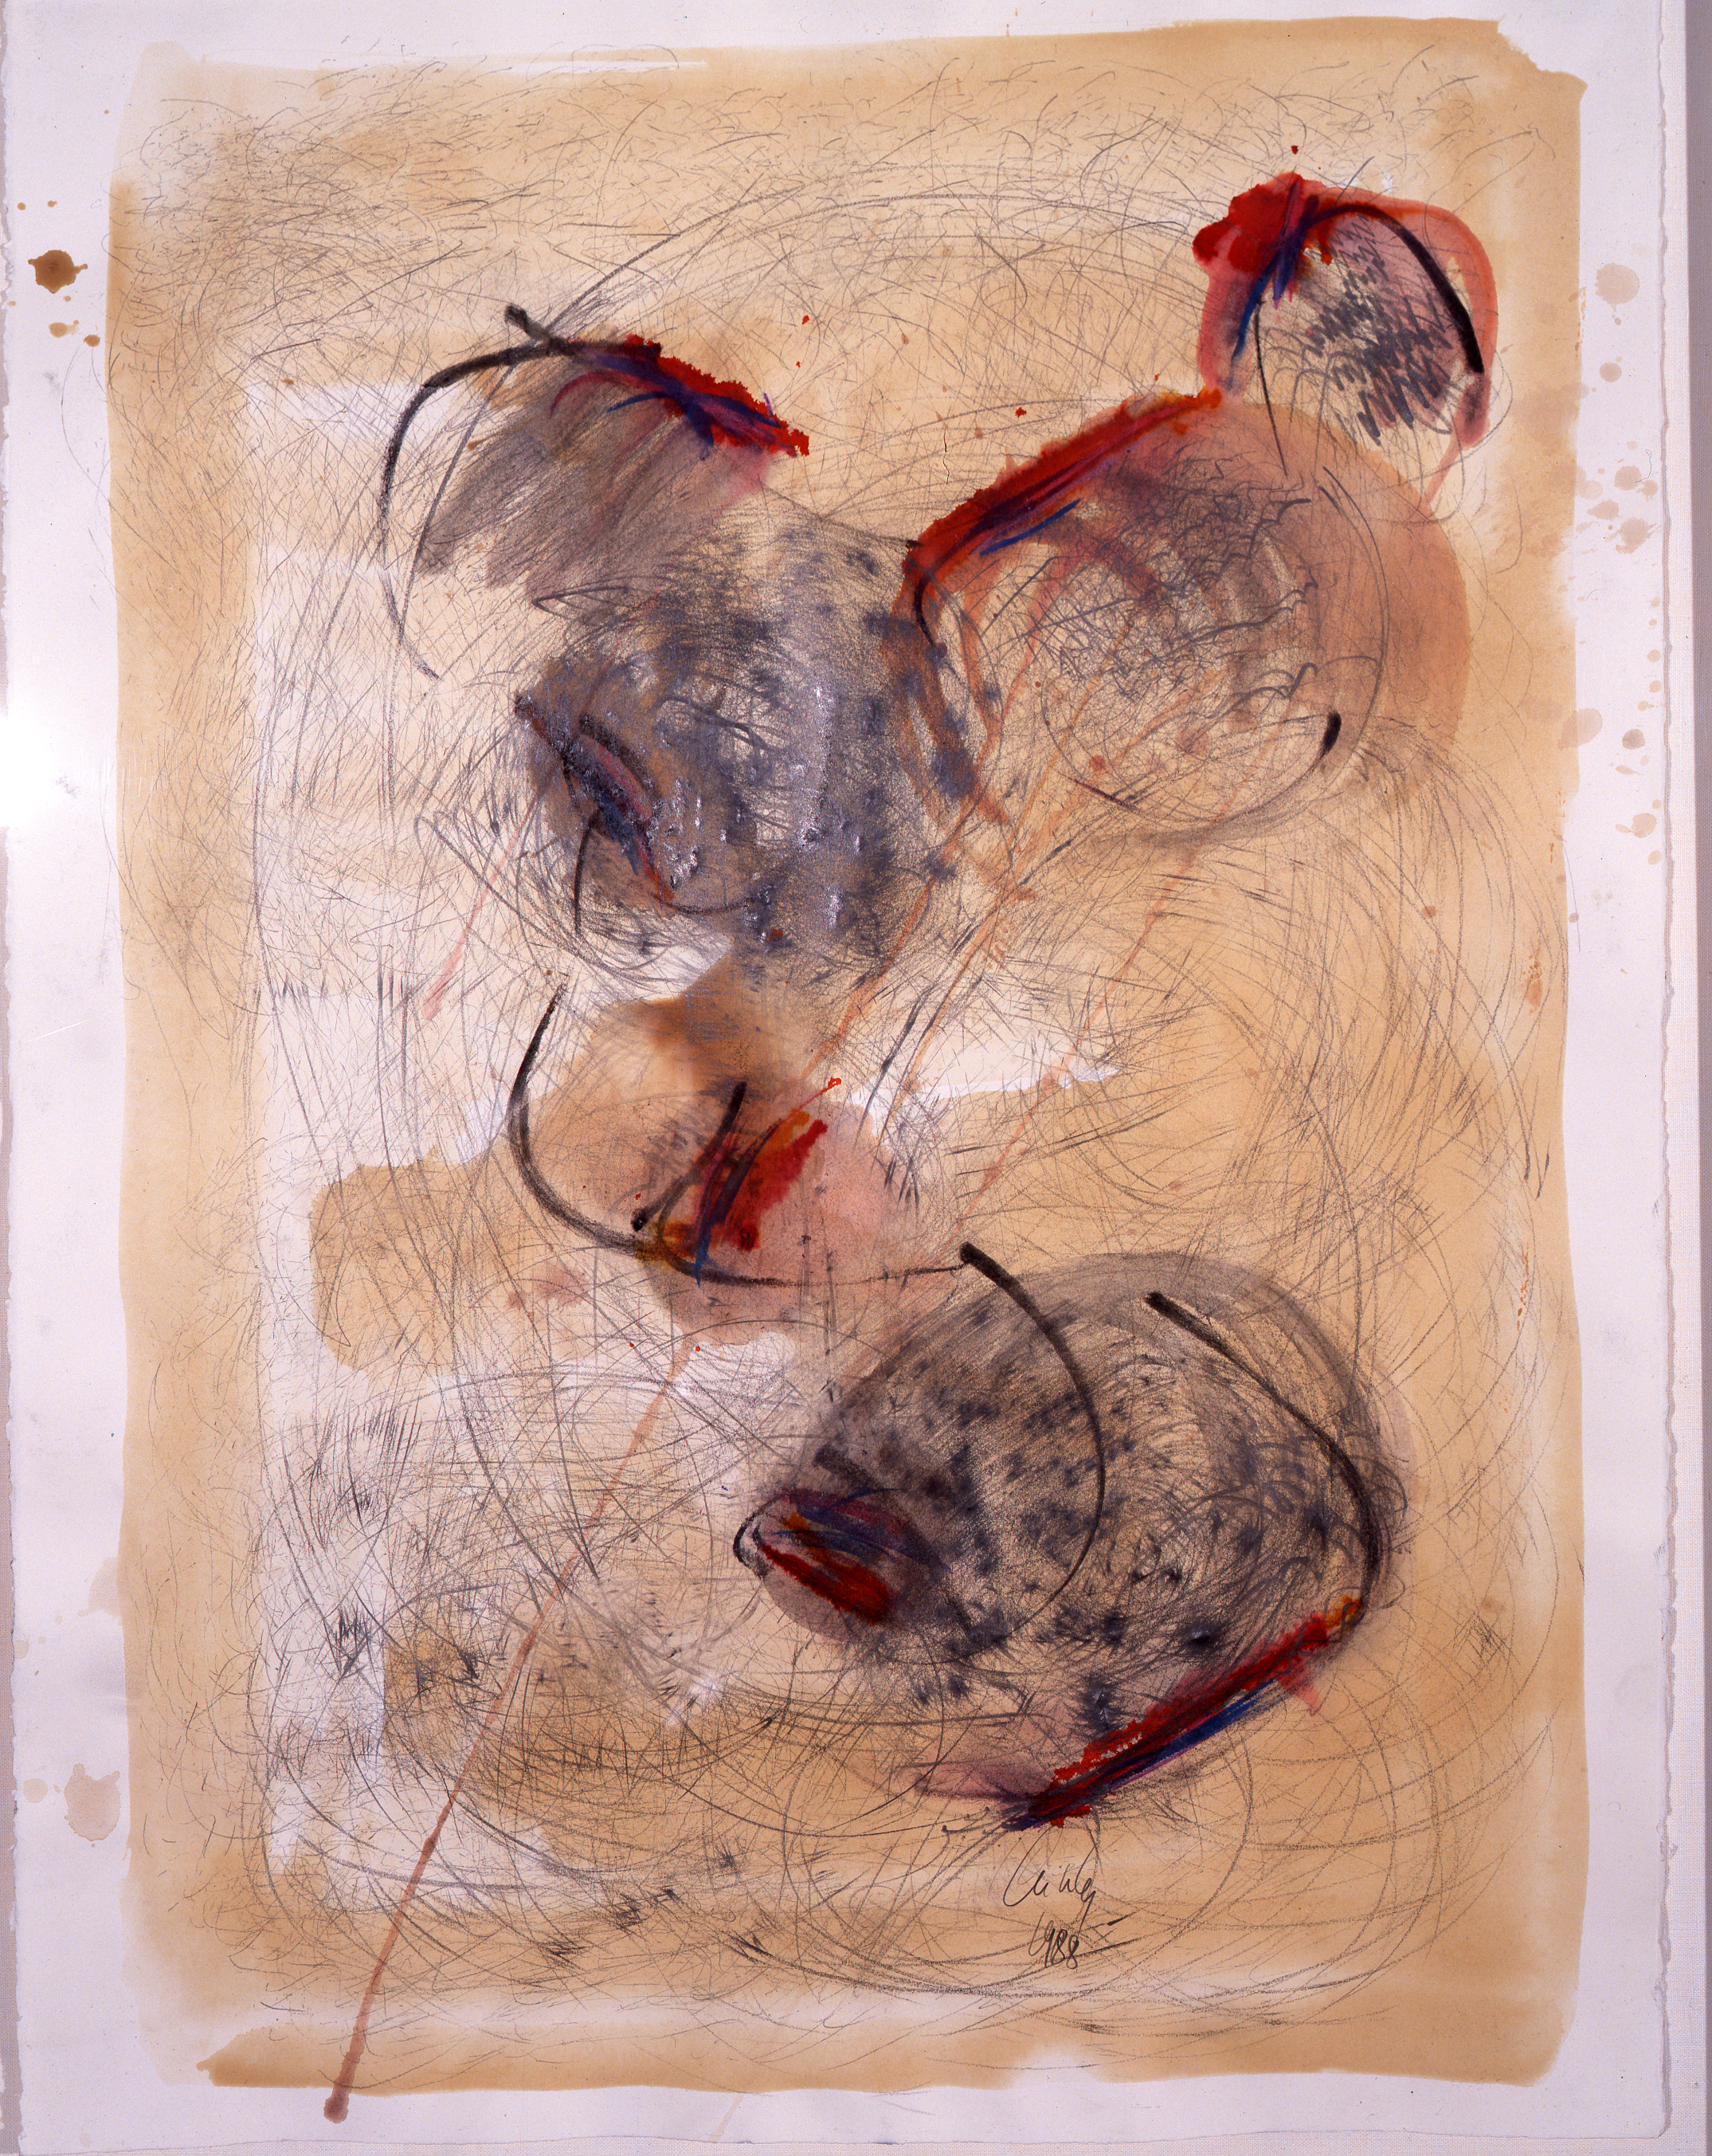  Dale Chihuly,&nbsp; Basket Drawing,&nbsp; (1988, mixed media&nbsp;on paper, 30 x 22 inches), DC.364 